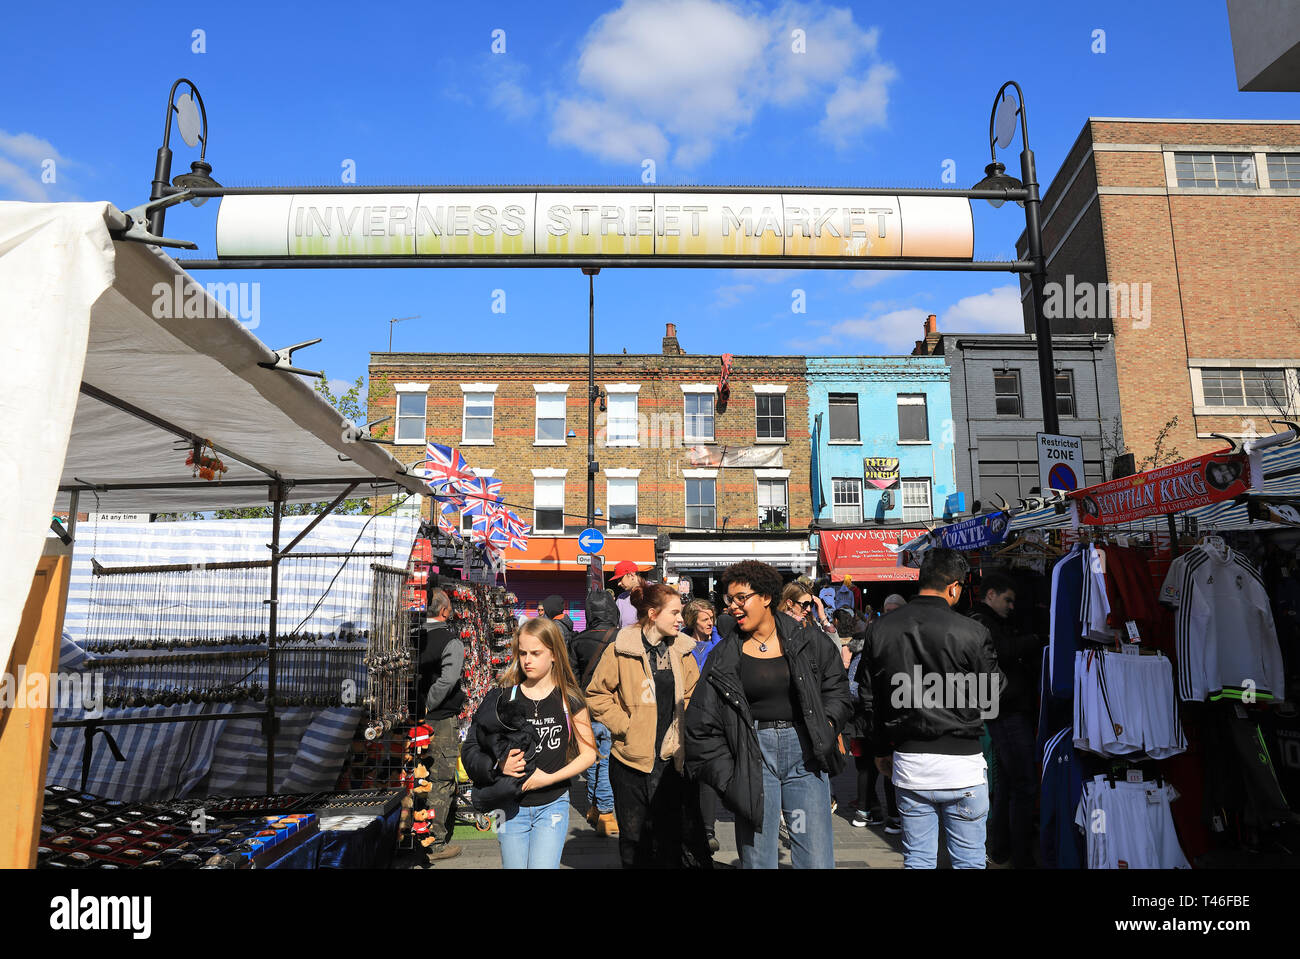 Inverness Street Market in Camden Town, north London, UK Stock Photo